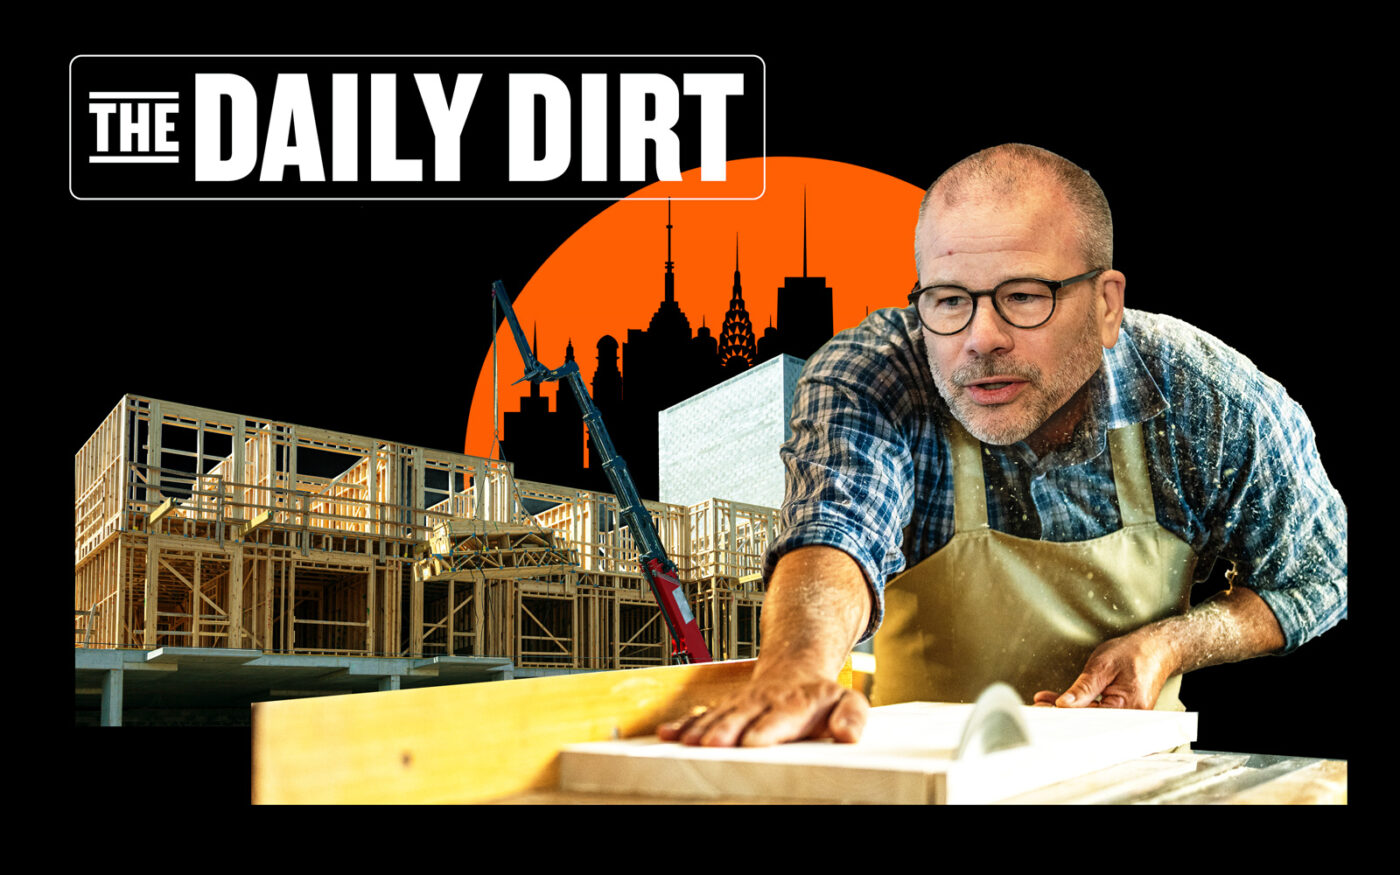 The Daily Dirt Breaks Down NYC’s Mass Timber Experiment